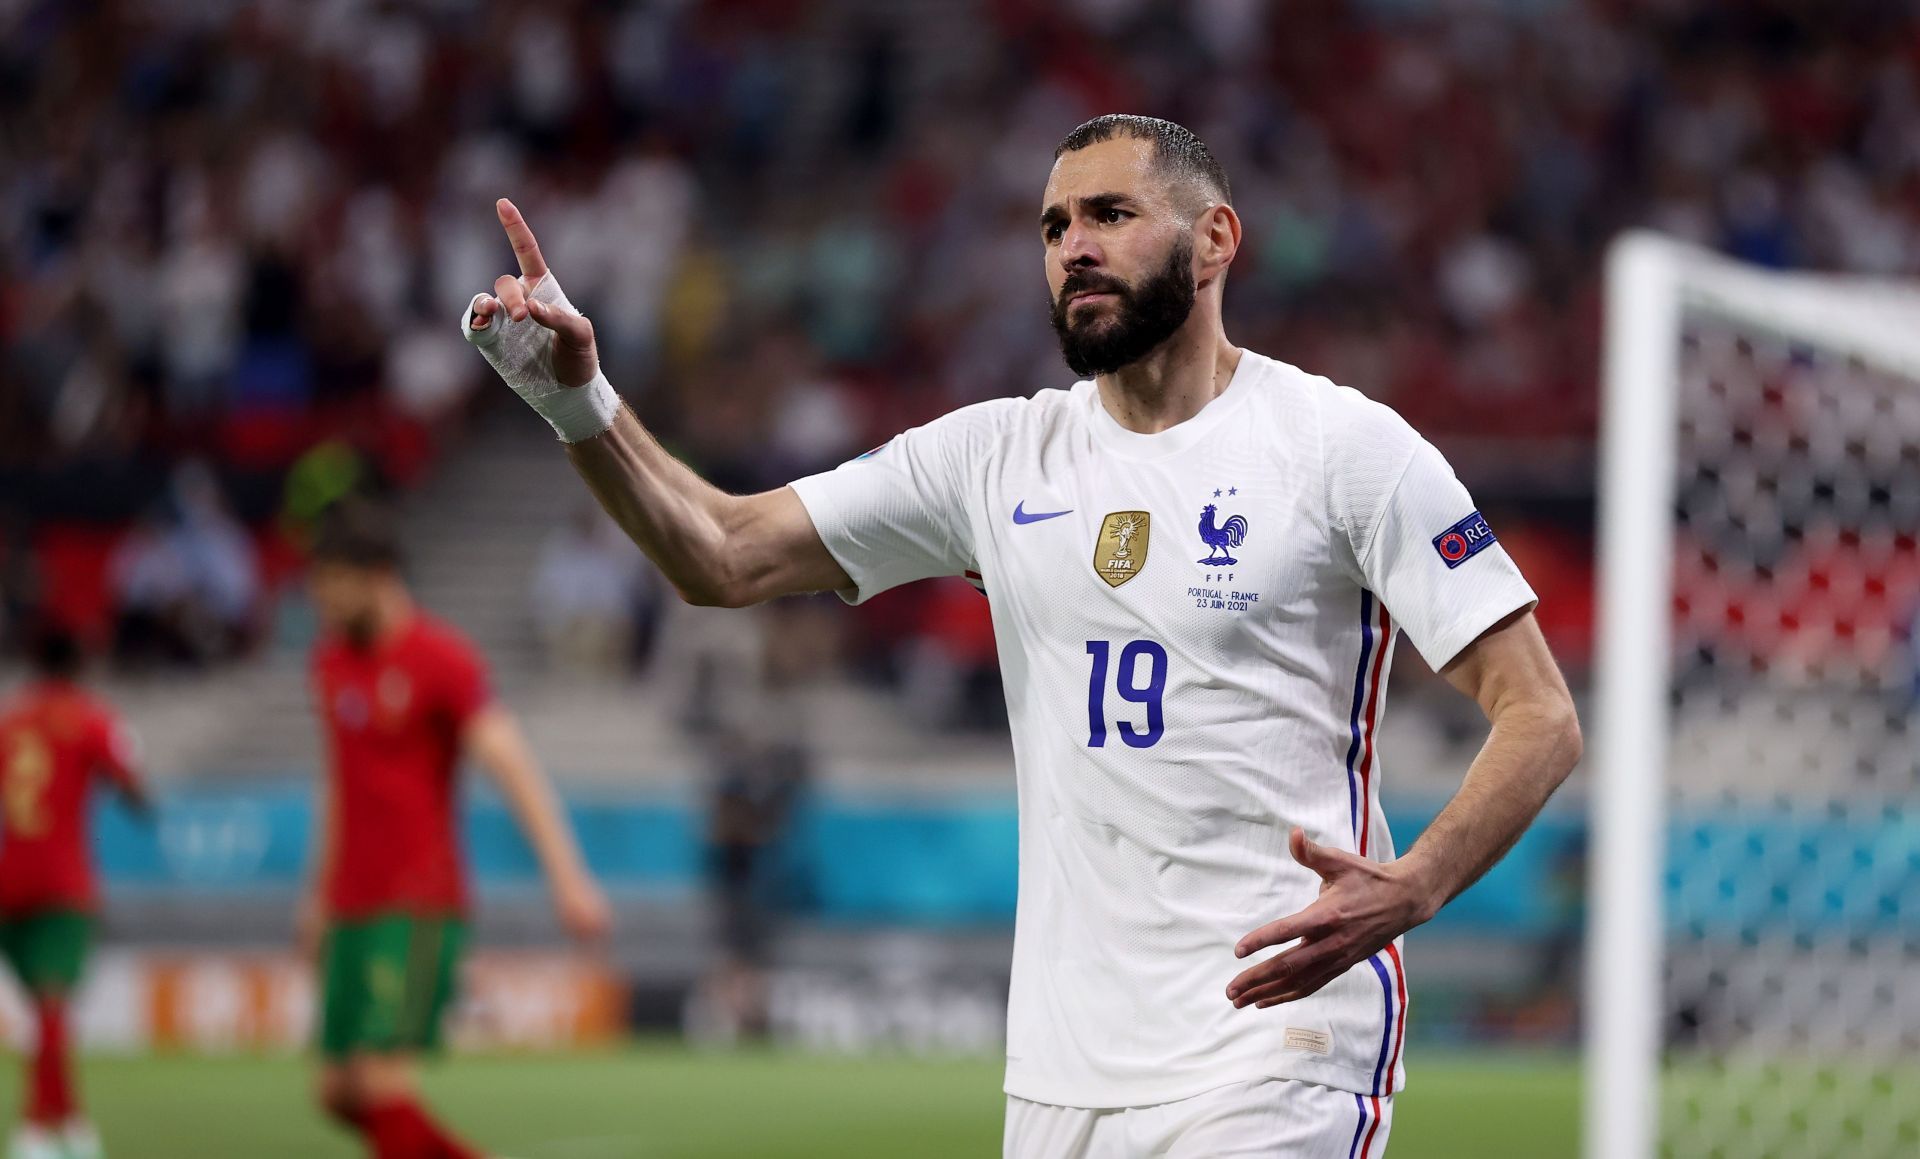 Benzema returned to the national side after a lengthy break of five years